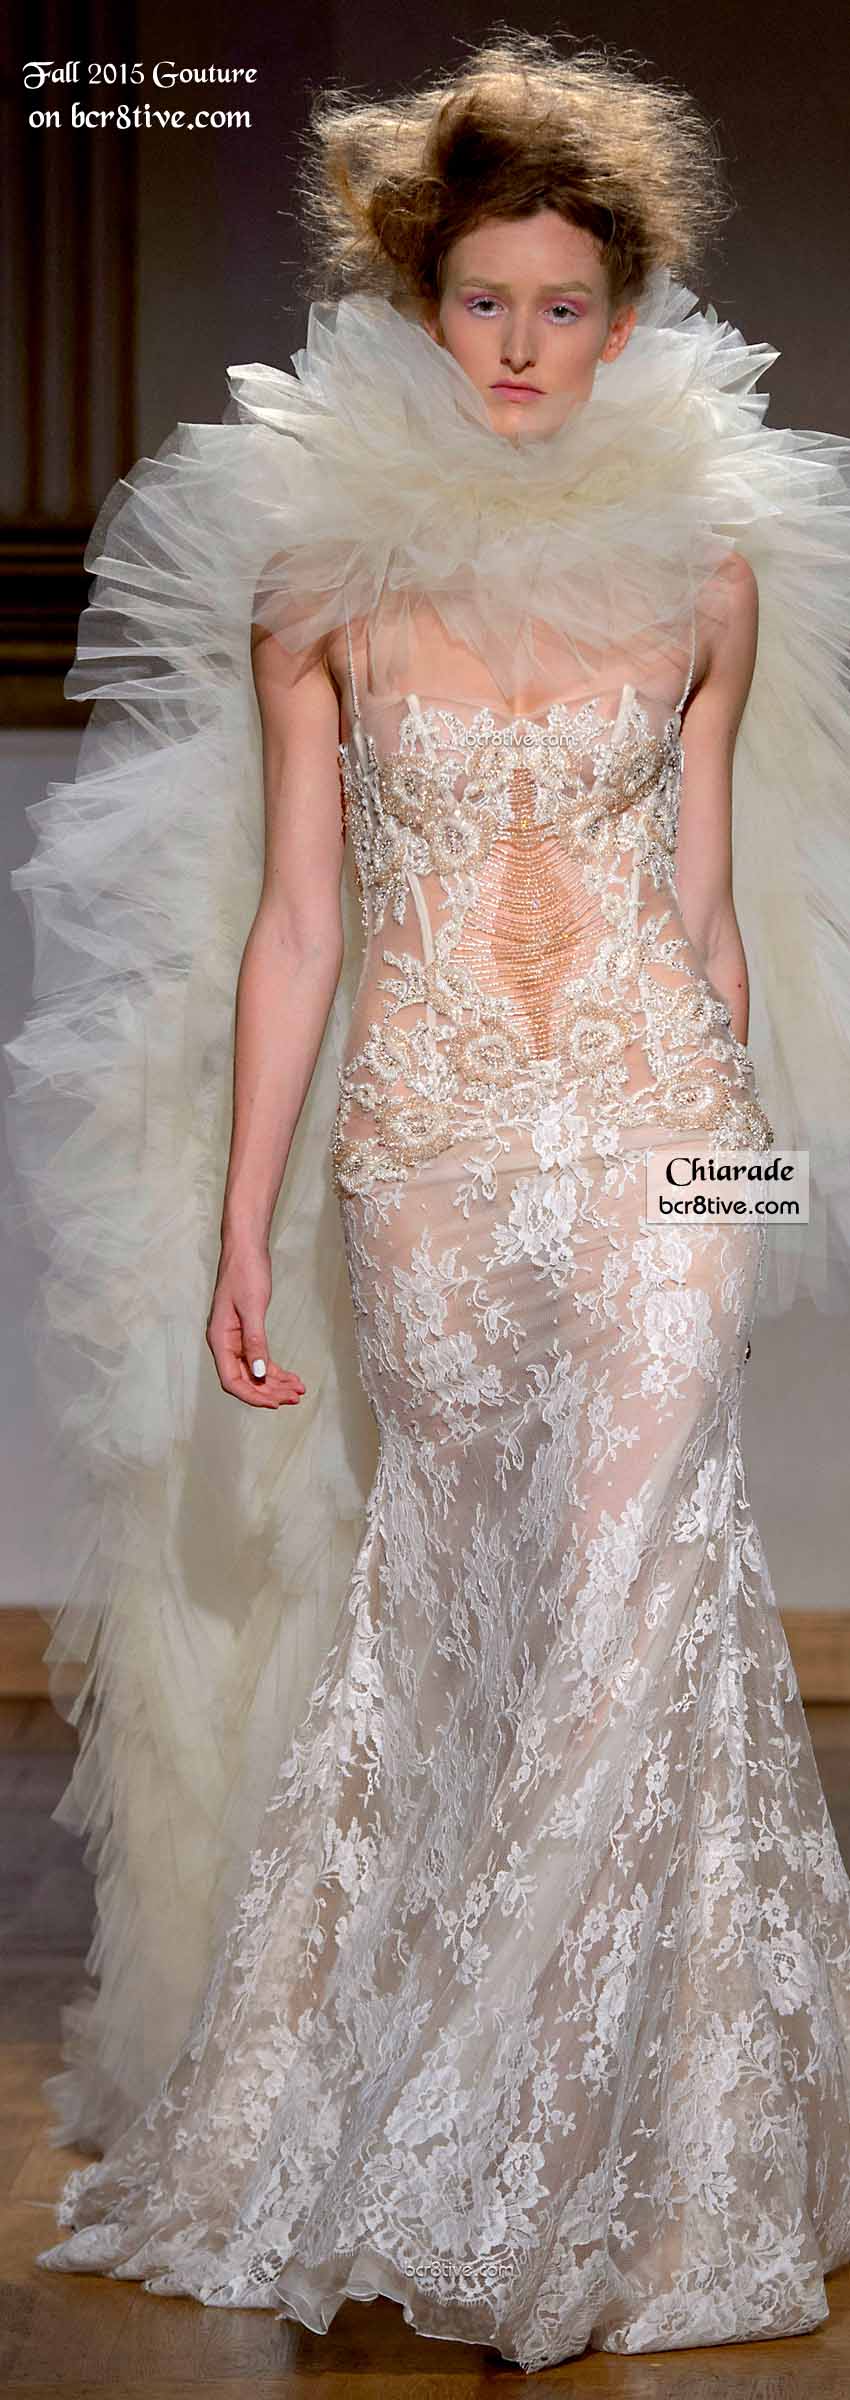 The Best Haute Couture Fashion of Fall 2015-16 – Page 3 – Be Creative